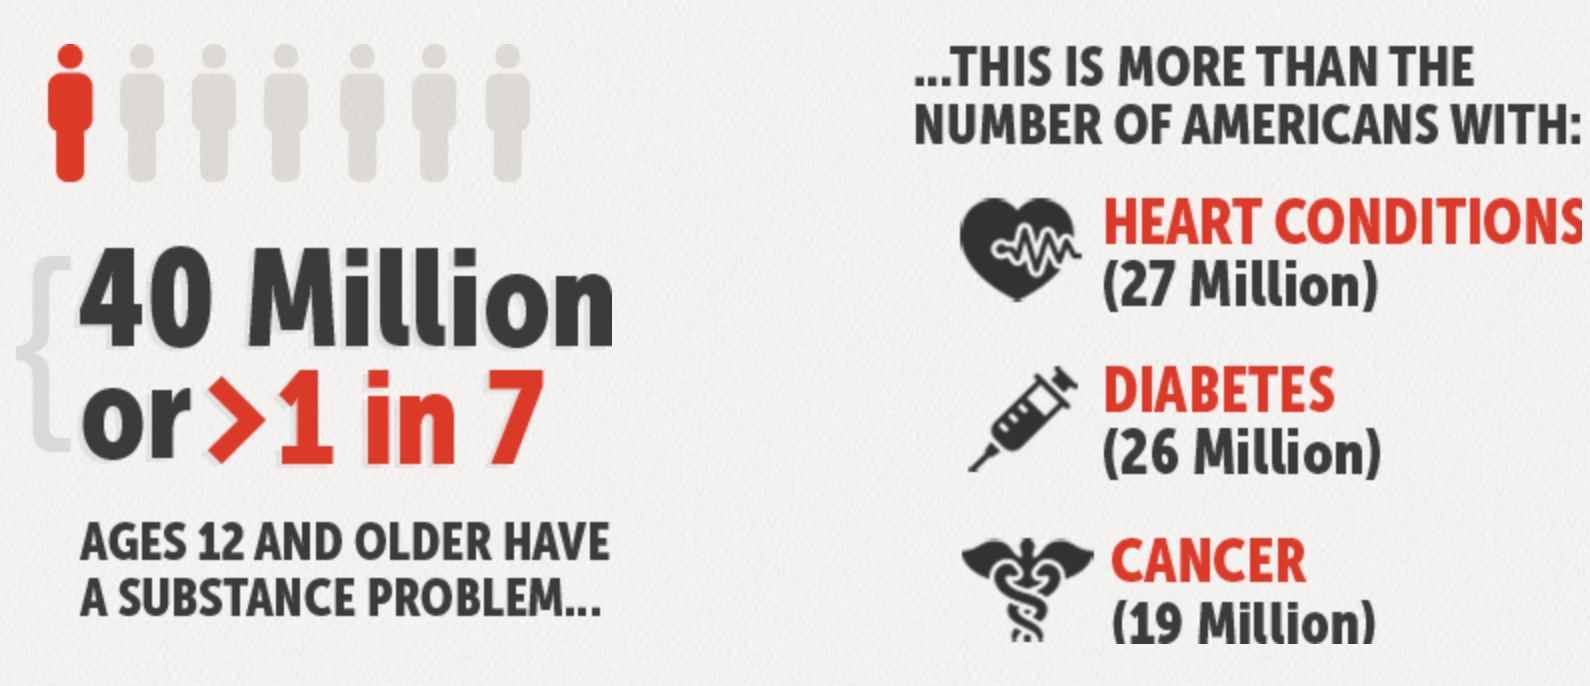 KNOW THE FACTS: Addiction is a disease.